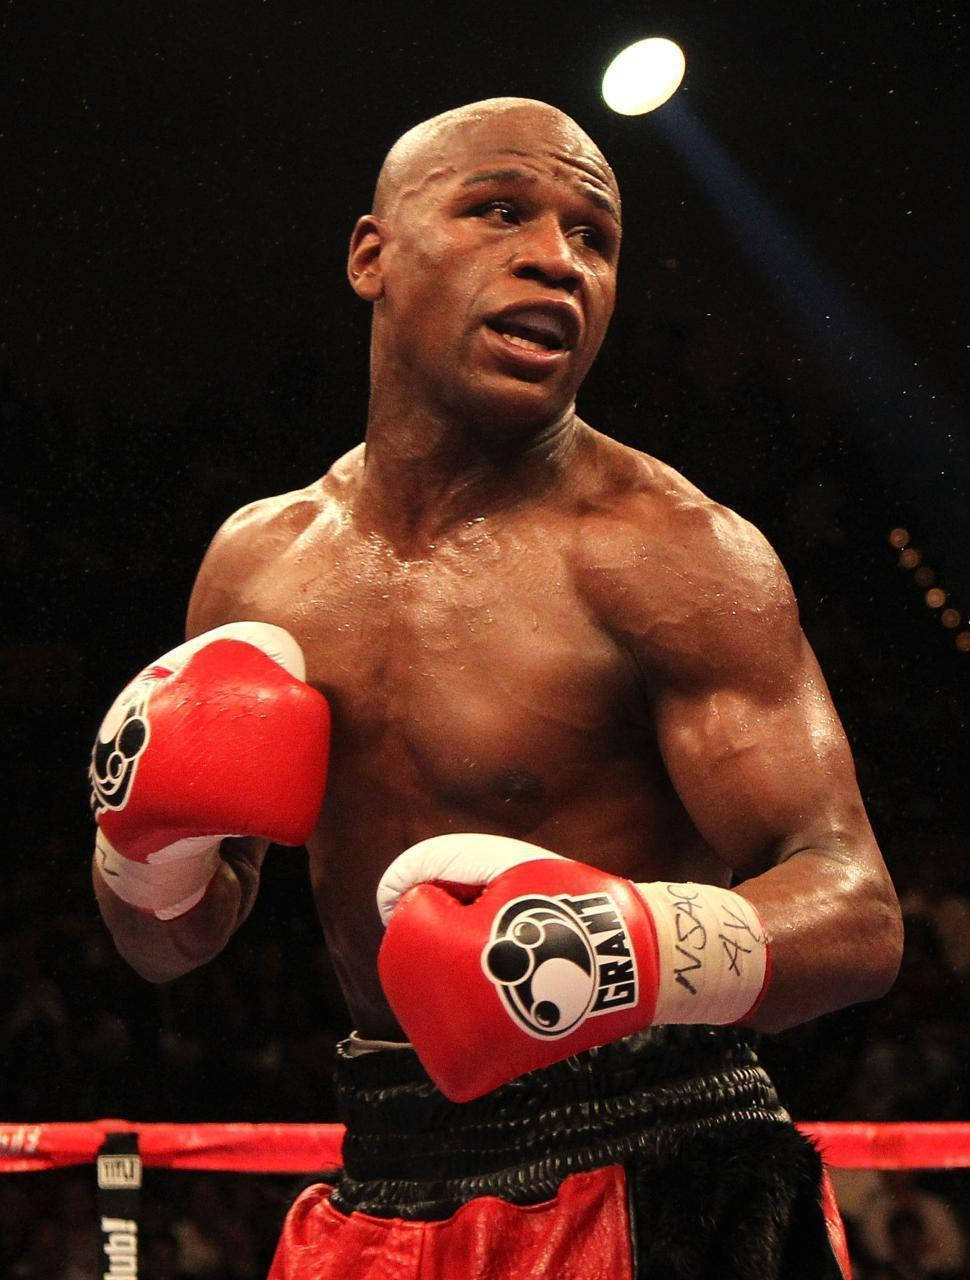 Floyd Mayweather Jr Boxing attractive Wallpapers poster Print Poster on  LARGE PRINT 36X24 INCHES Photographic Paper  Art  Paintings posters in  India  Buy art film design movie music nature and